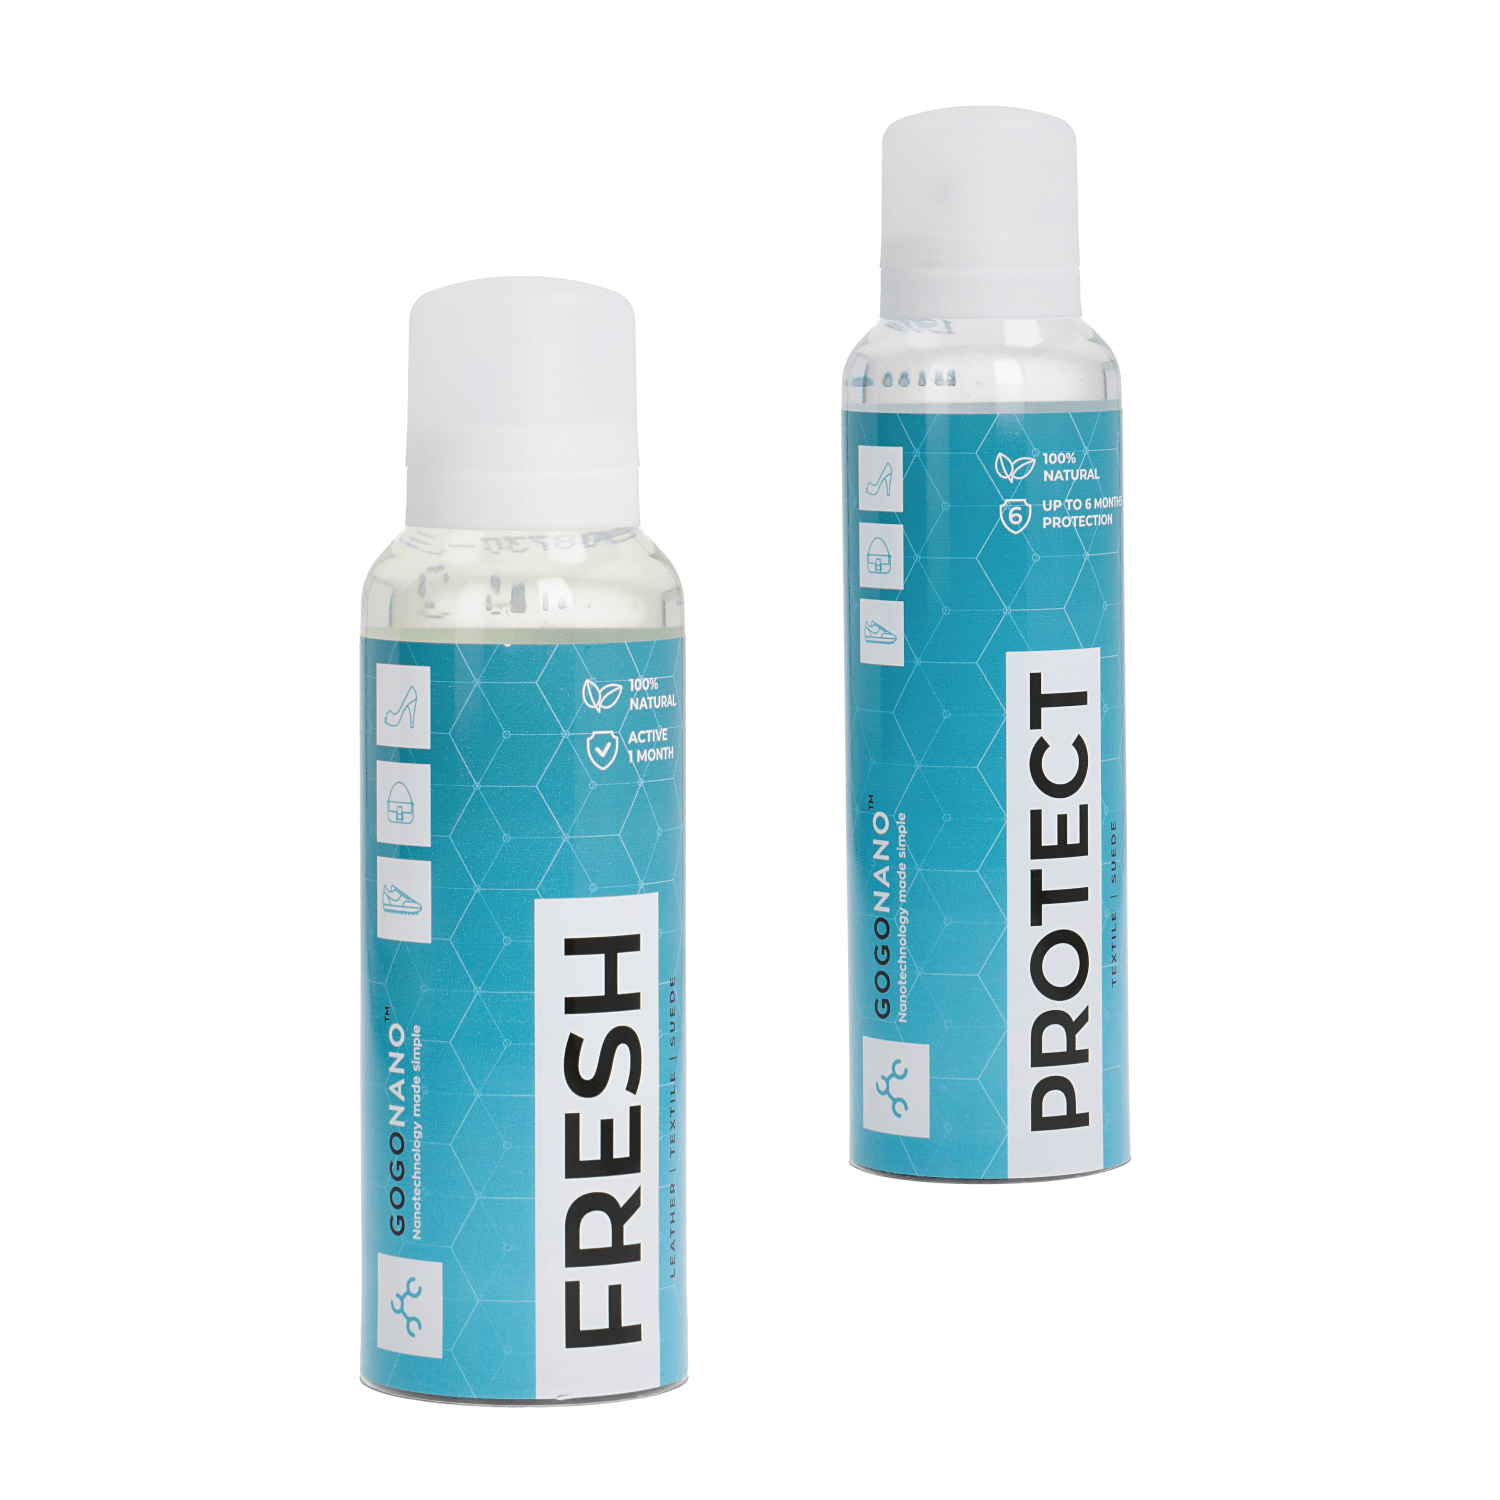 Fabric Protection Spray and shoe freshener for shoes and fashion